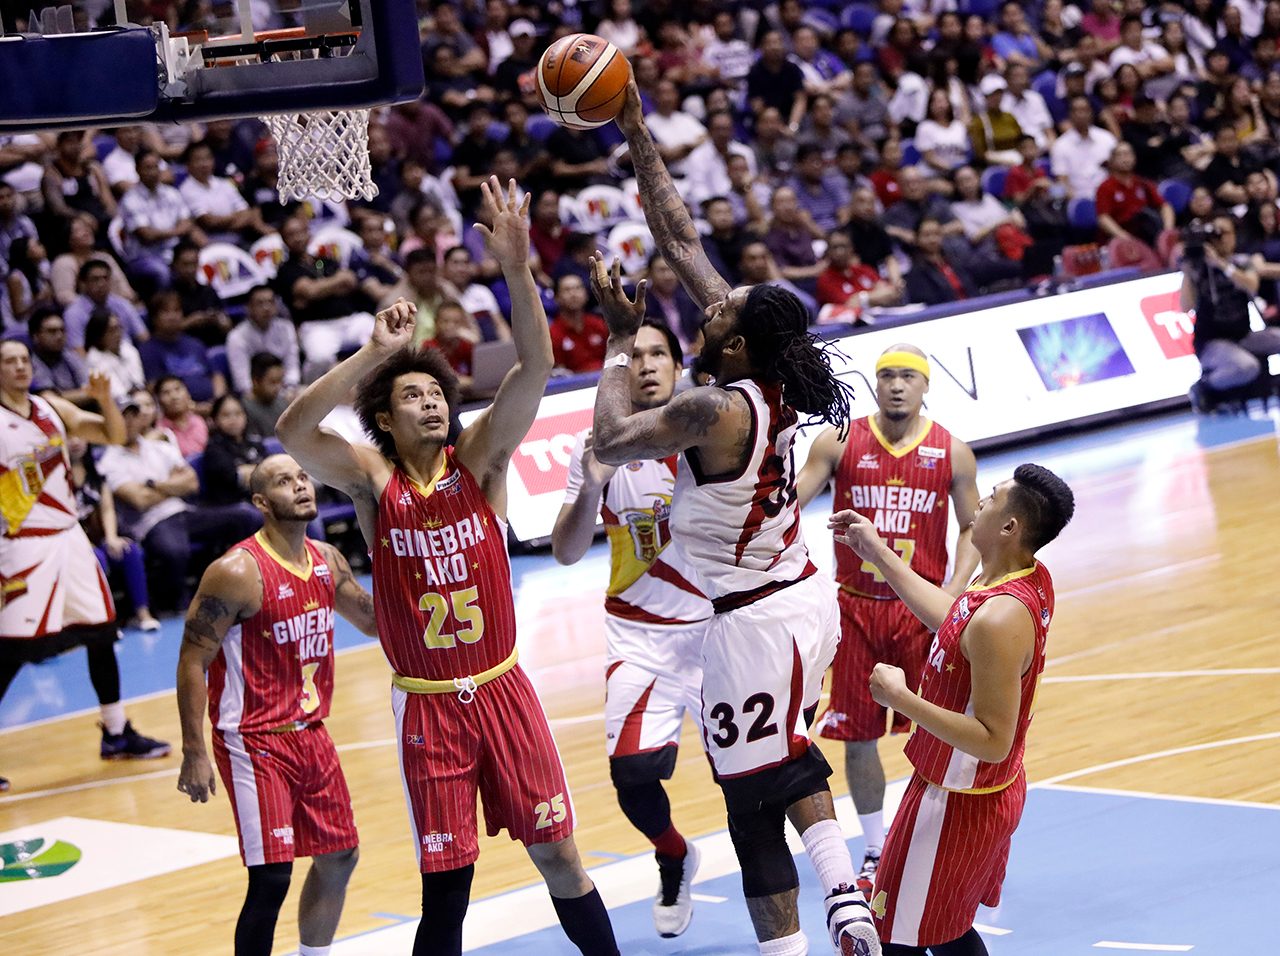 Lost and embarrassed Ginebra needs to find an answer